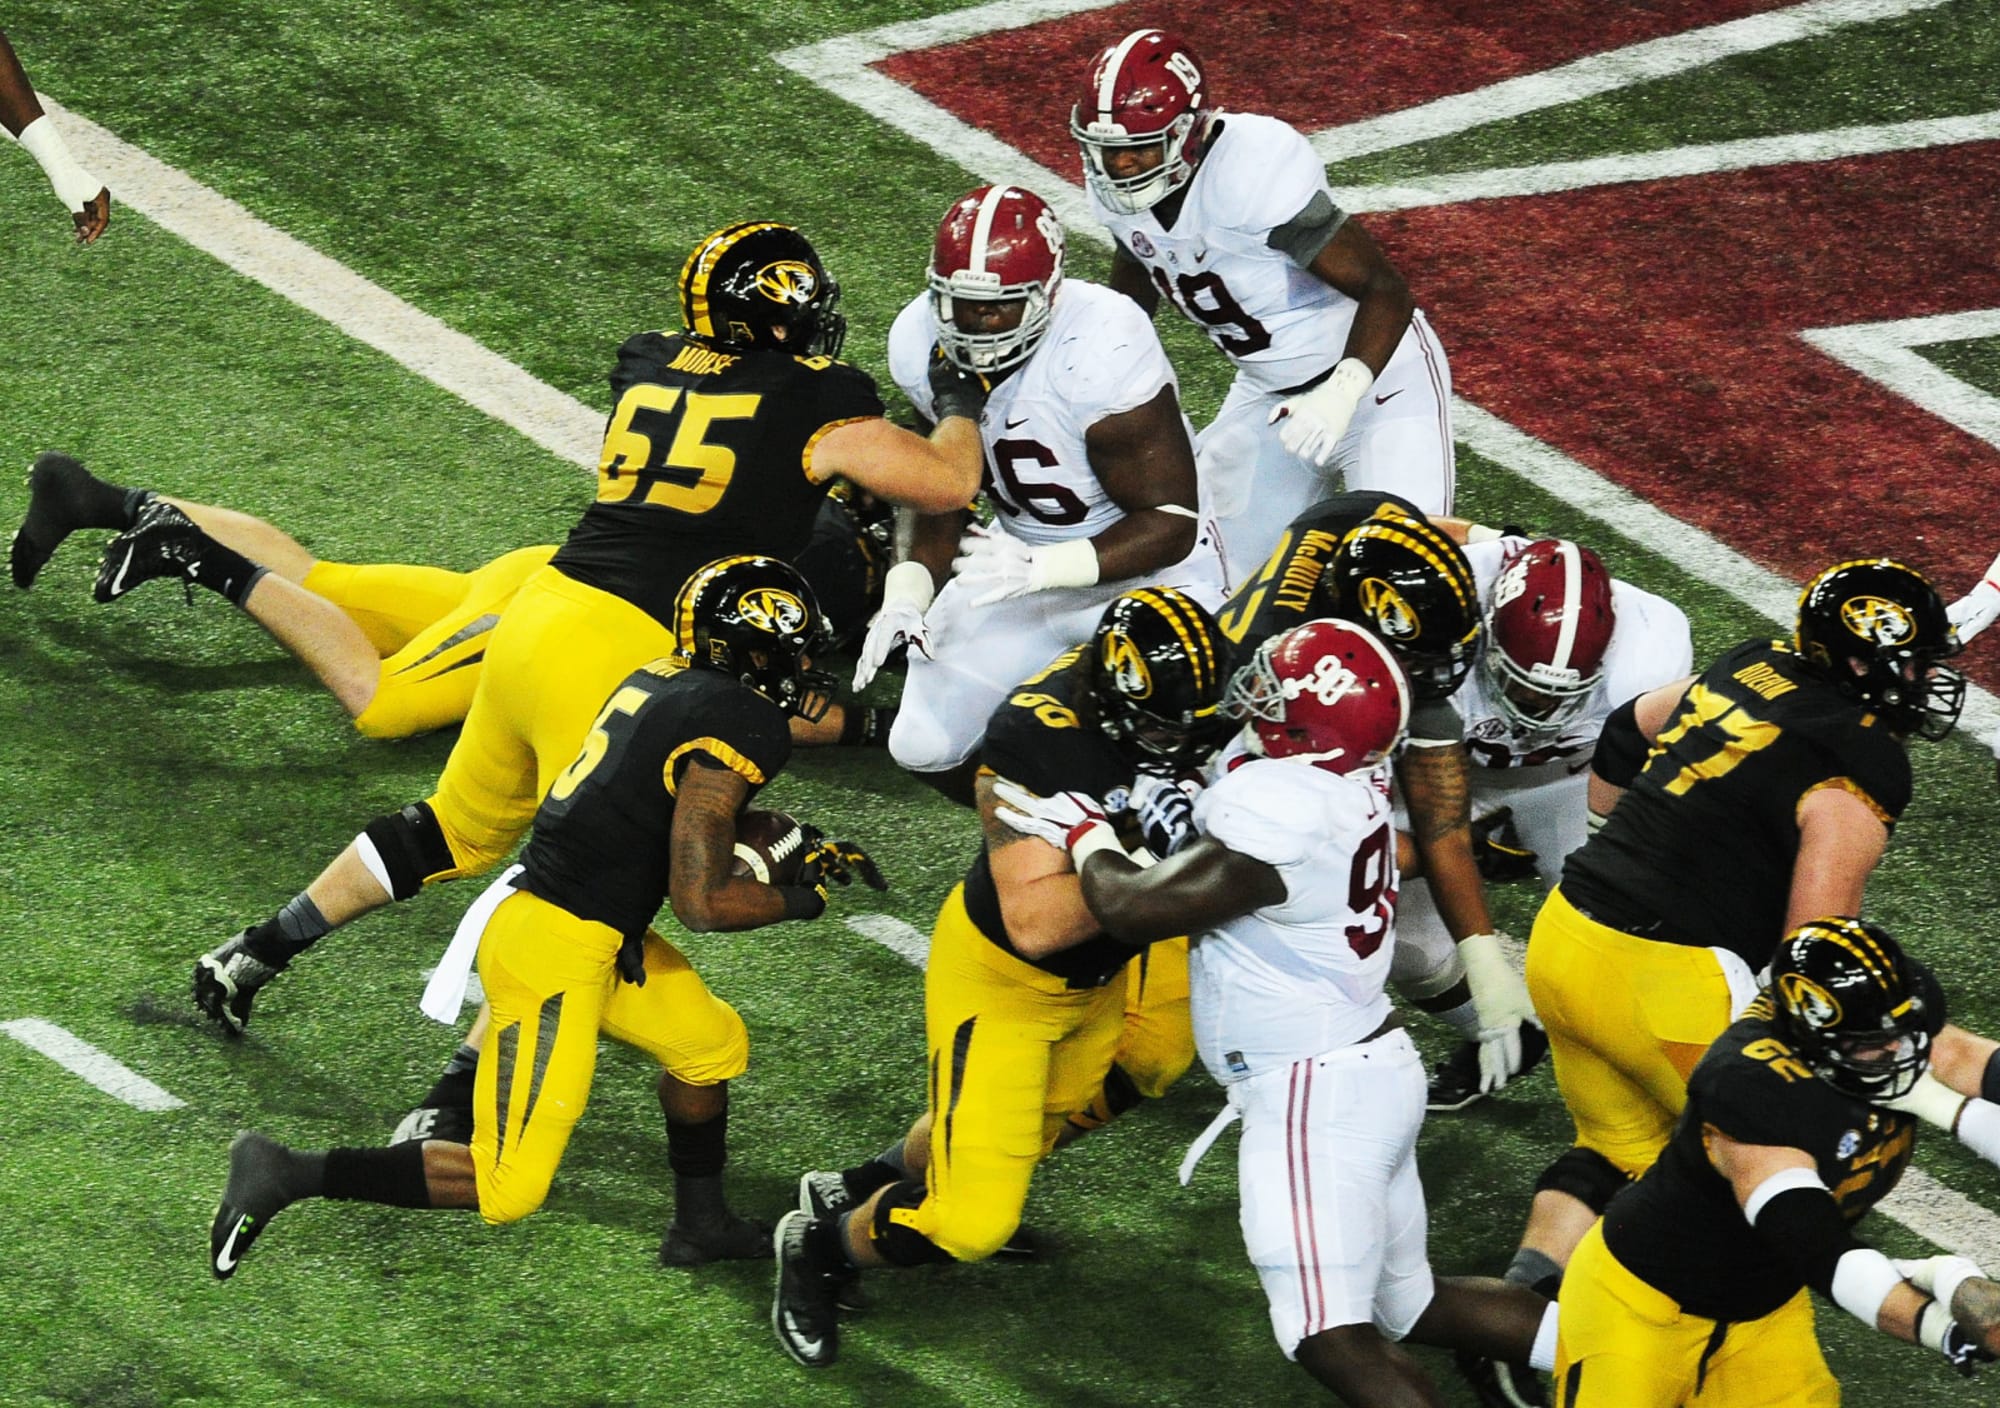 Mizzou Football has nothing to lose and everything to gain vs Alabama